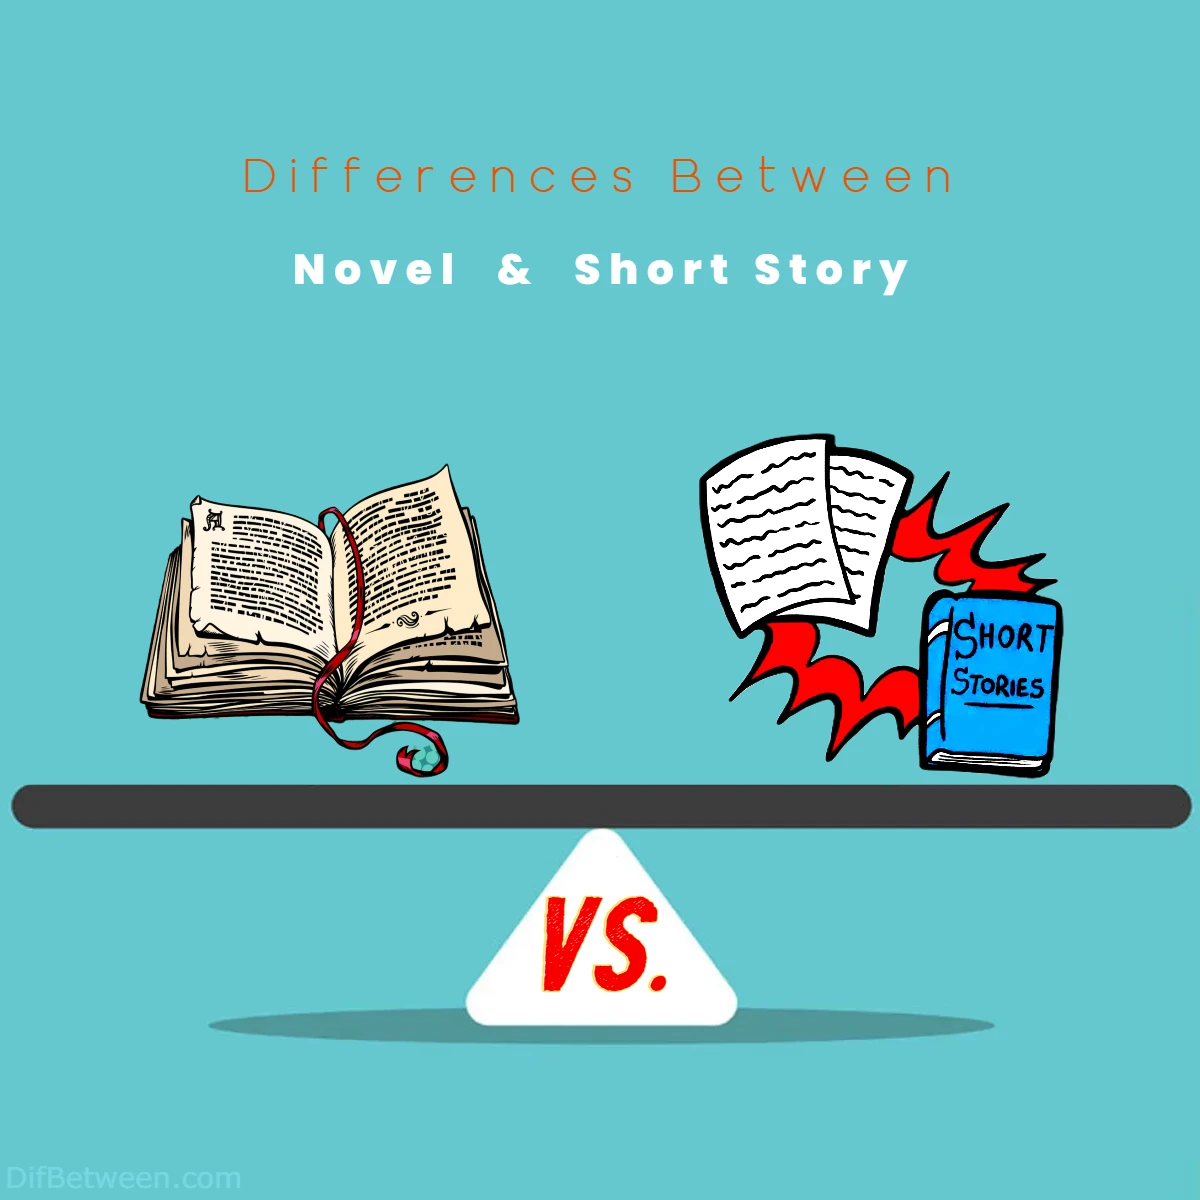 Differences Between Novel vs Short Story